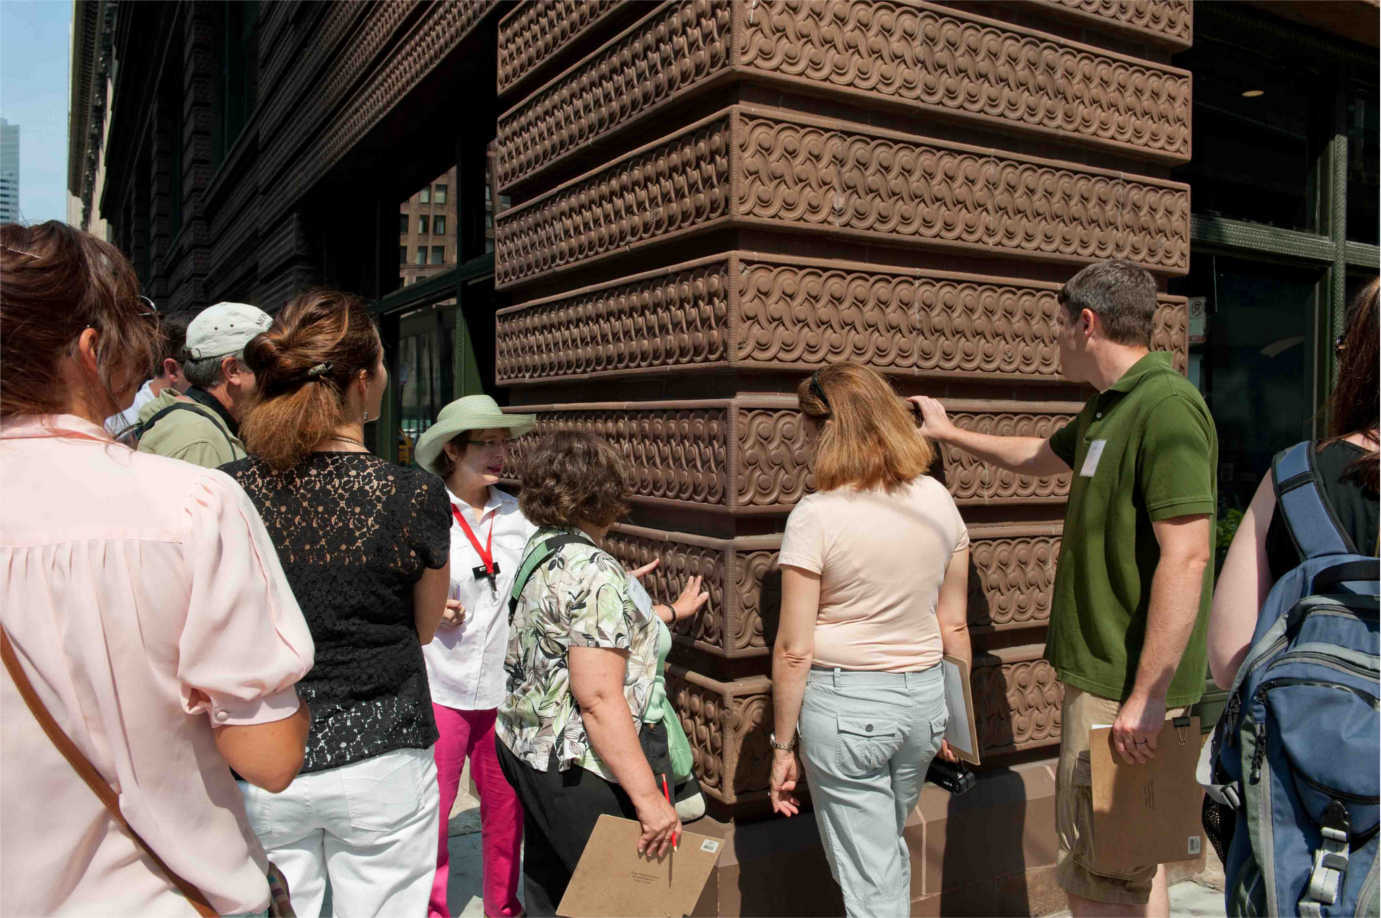 While touring Chicago, teachers inspect architectural details. Image courtesy of the Chicago Architecture Foundation.